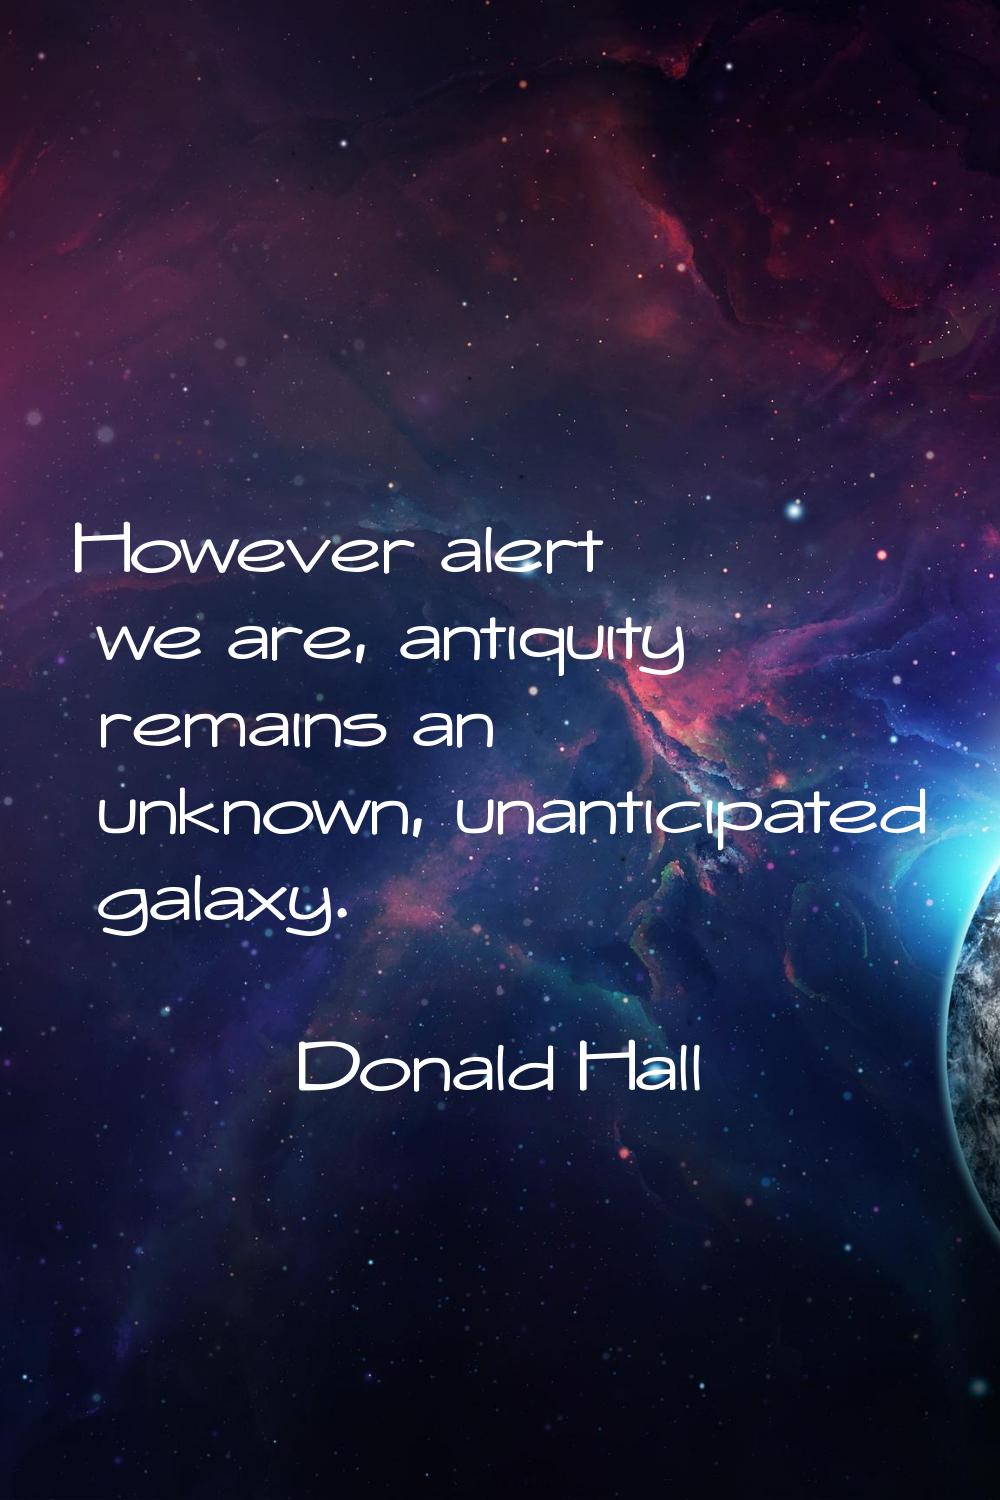 However alert we are, antiquity remains an unknown, unanticipated galaxy.